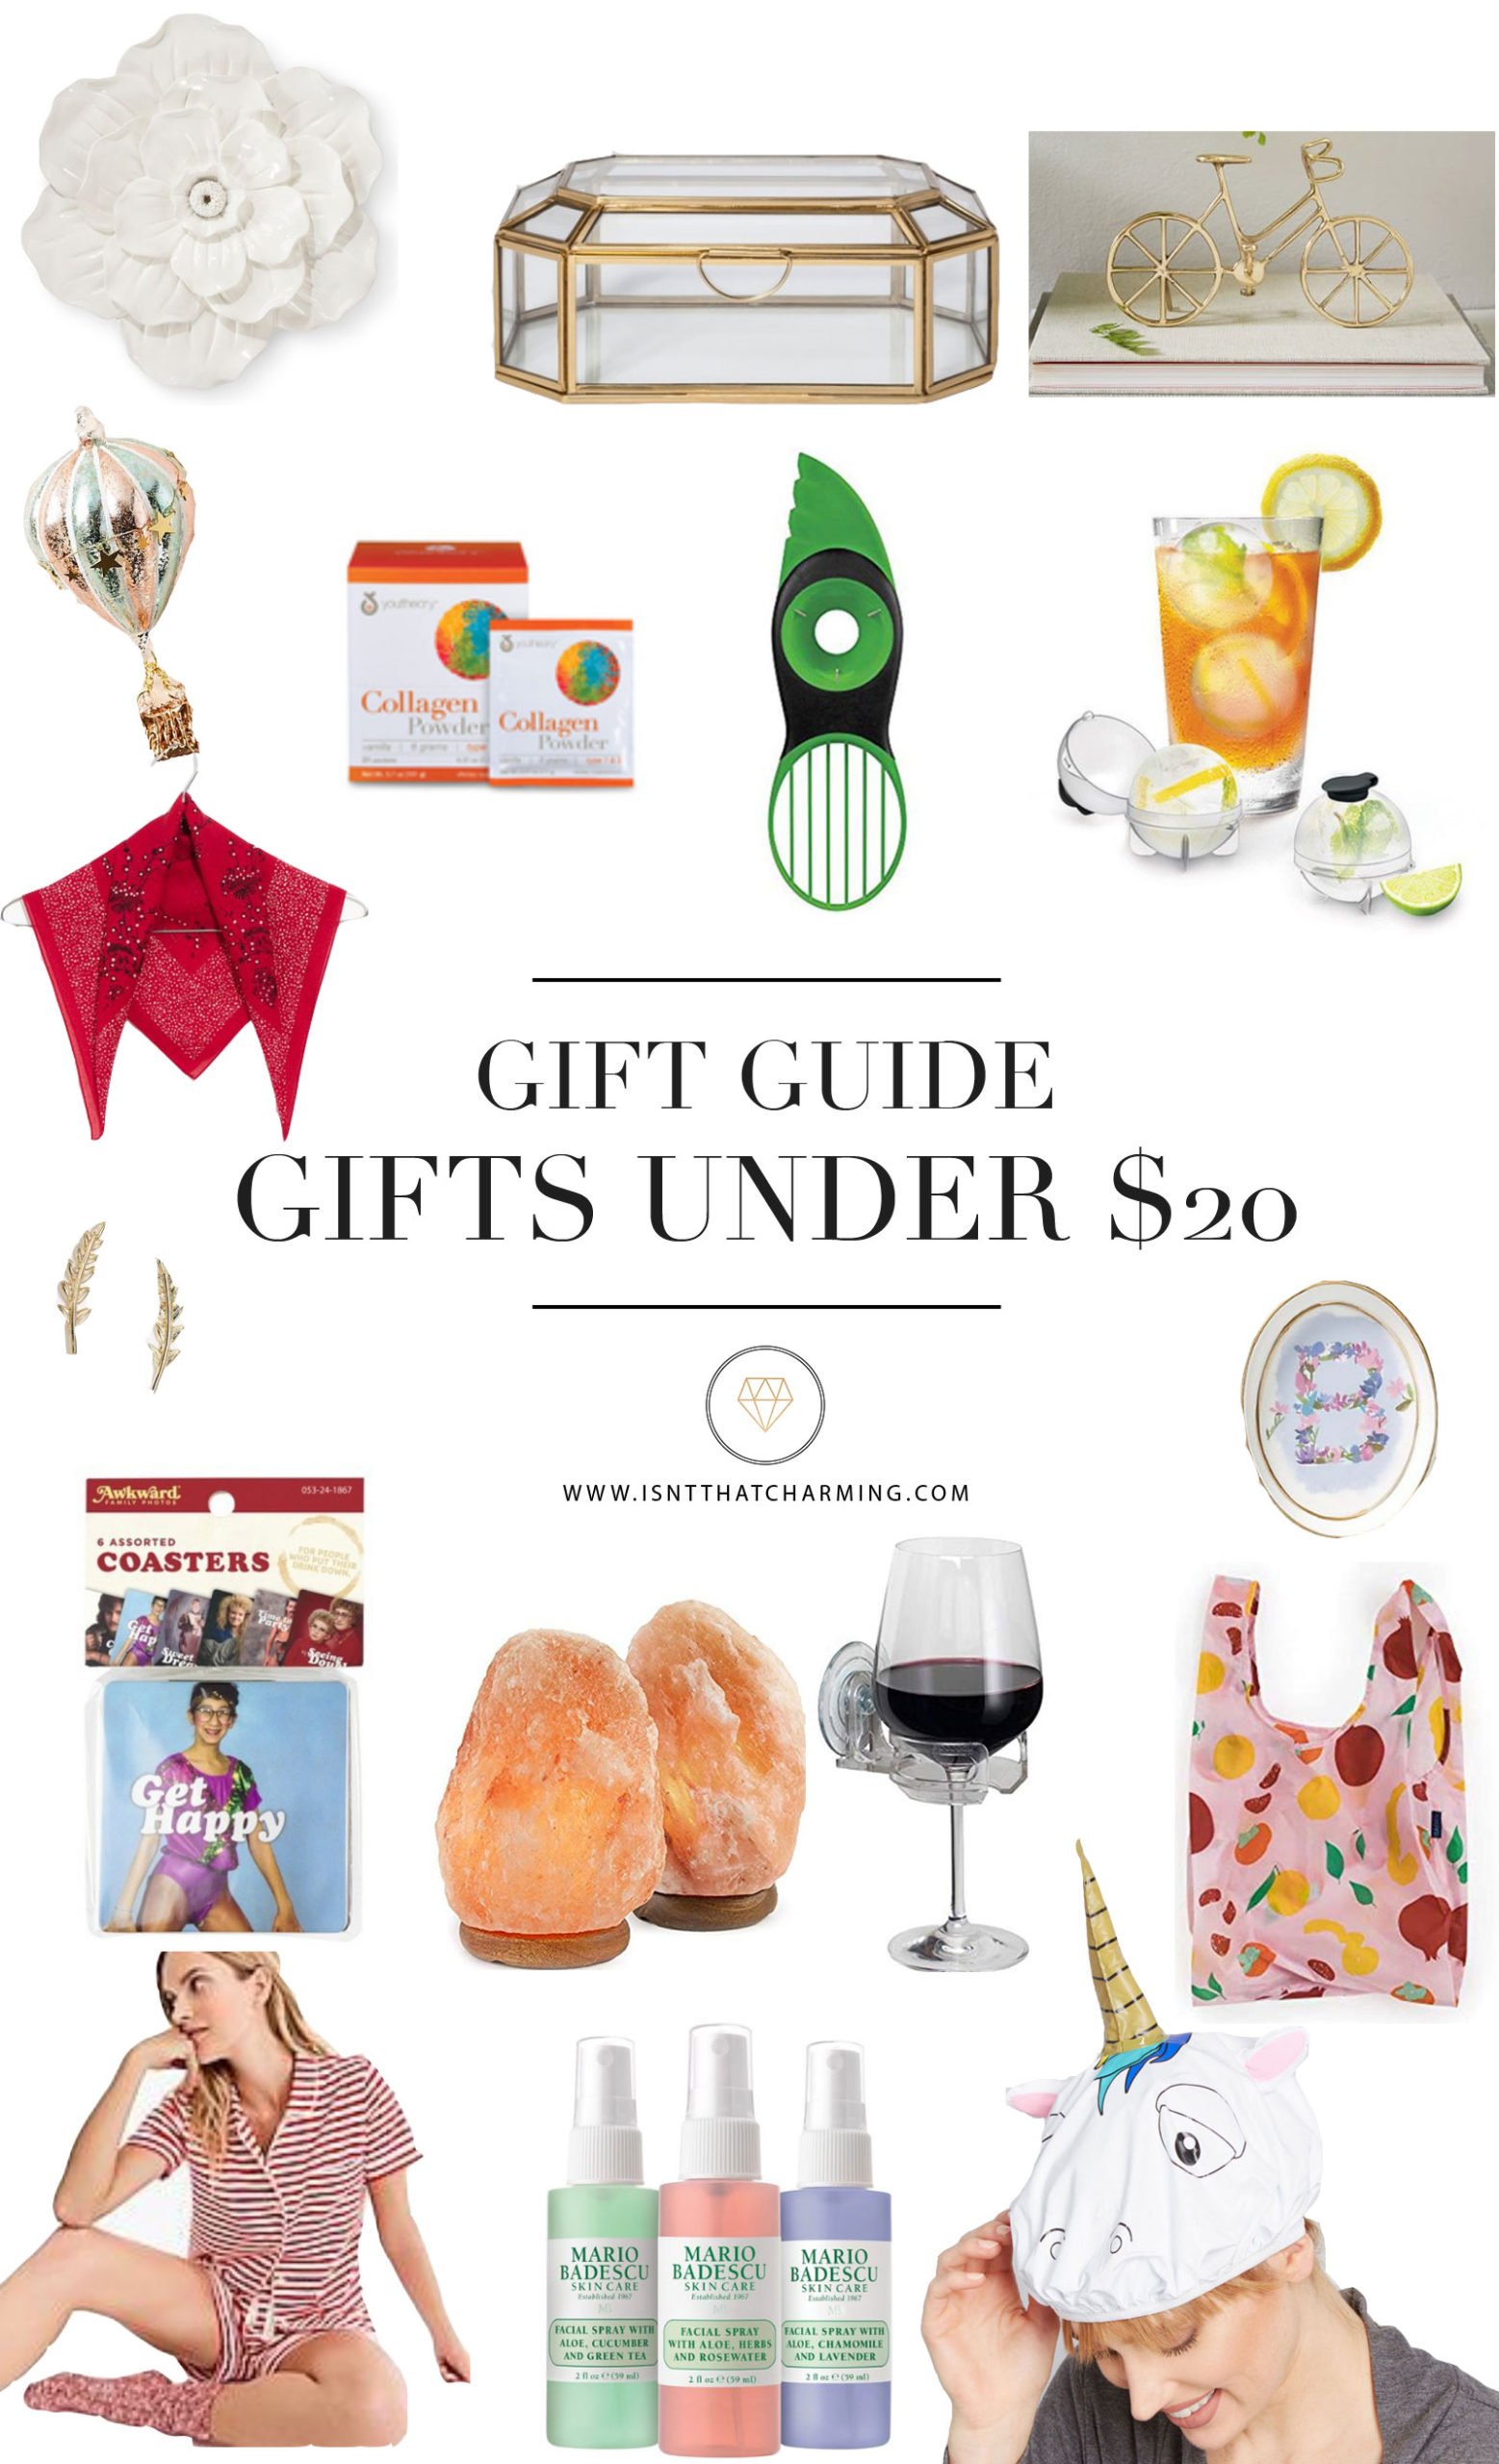 20 best Mother's Day gifts under $20 - Affordable gift ideas for